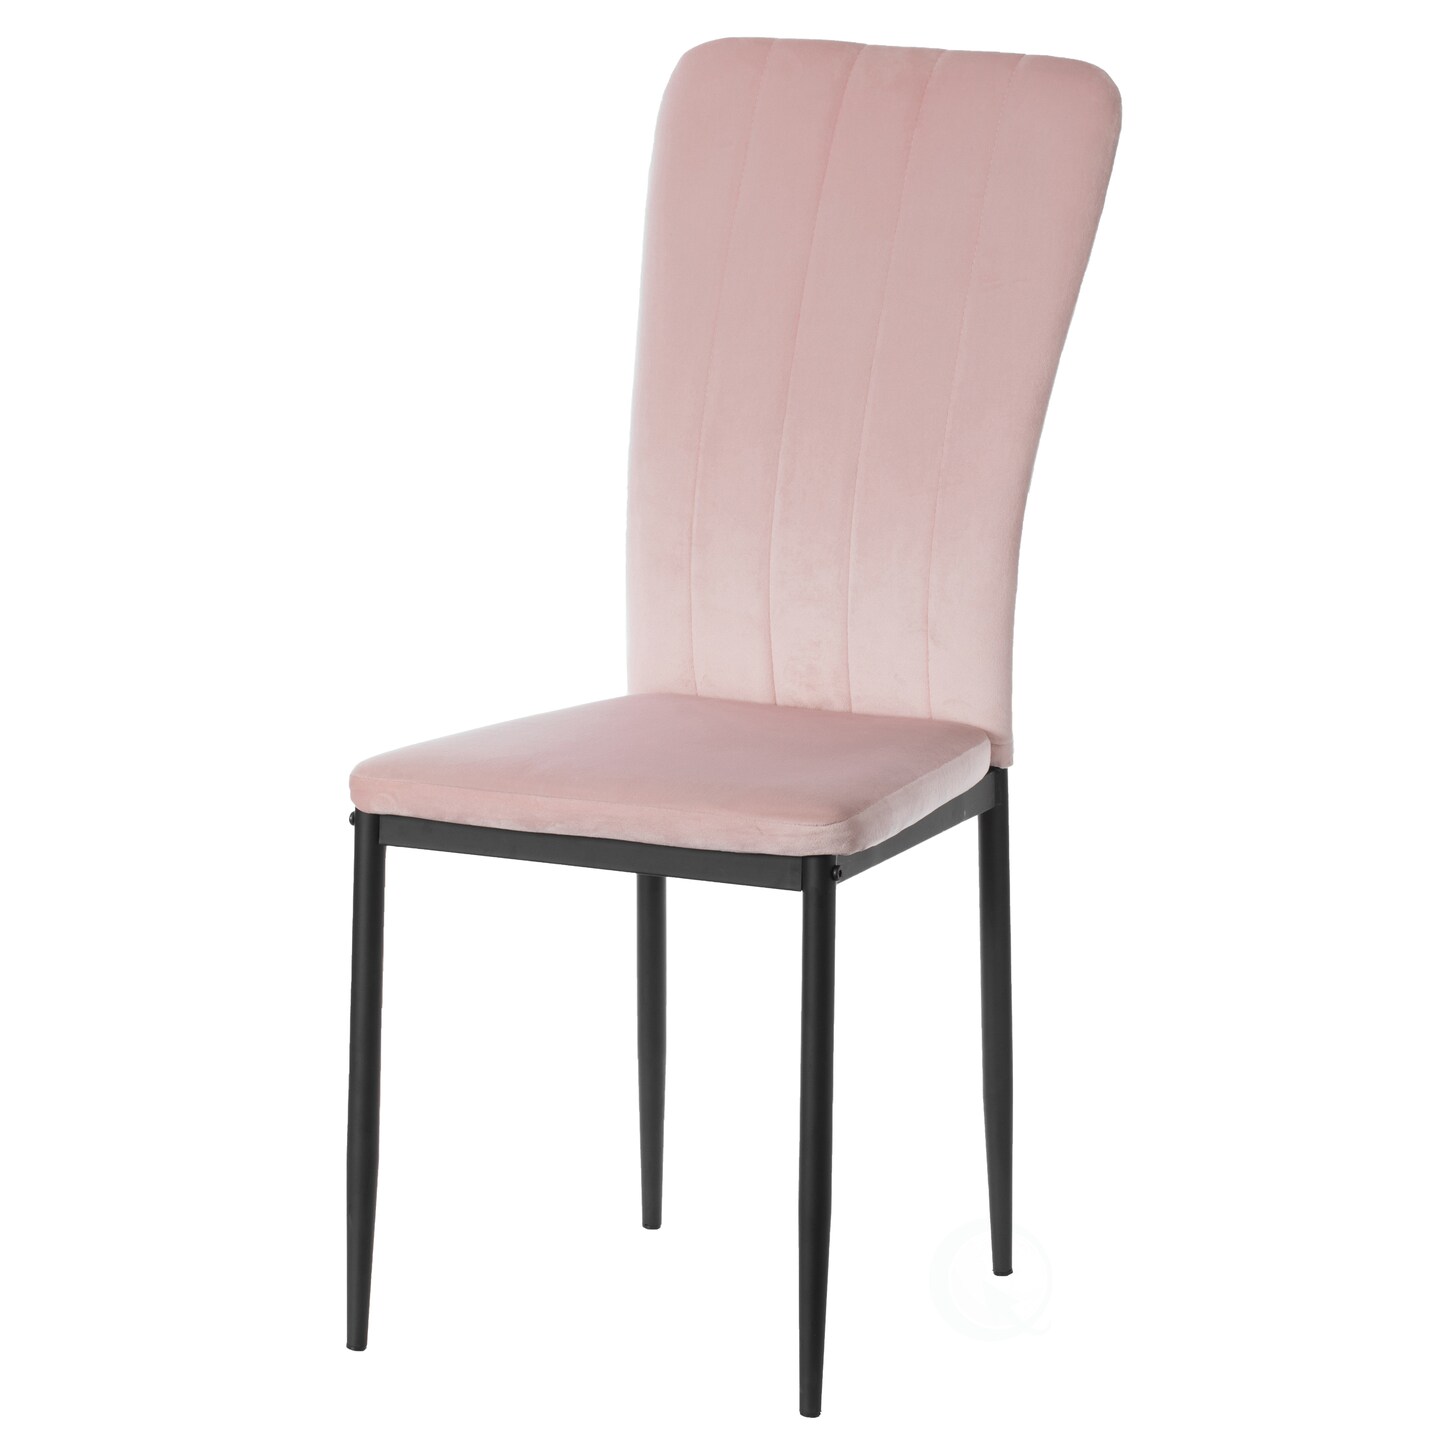 Modern And Contemporary Tufted Velvet Upholstered Accent Dining Chair